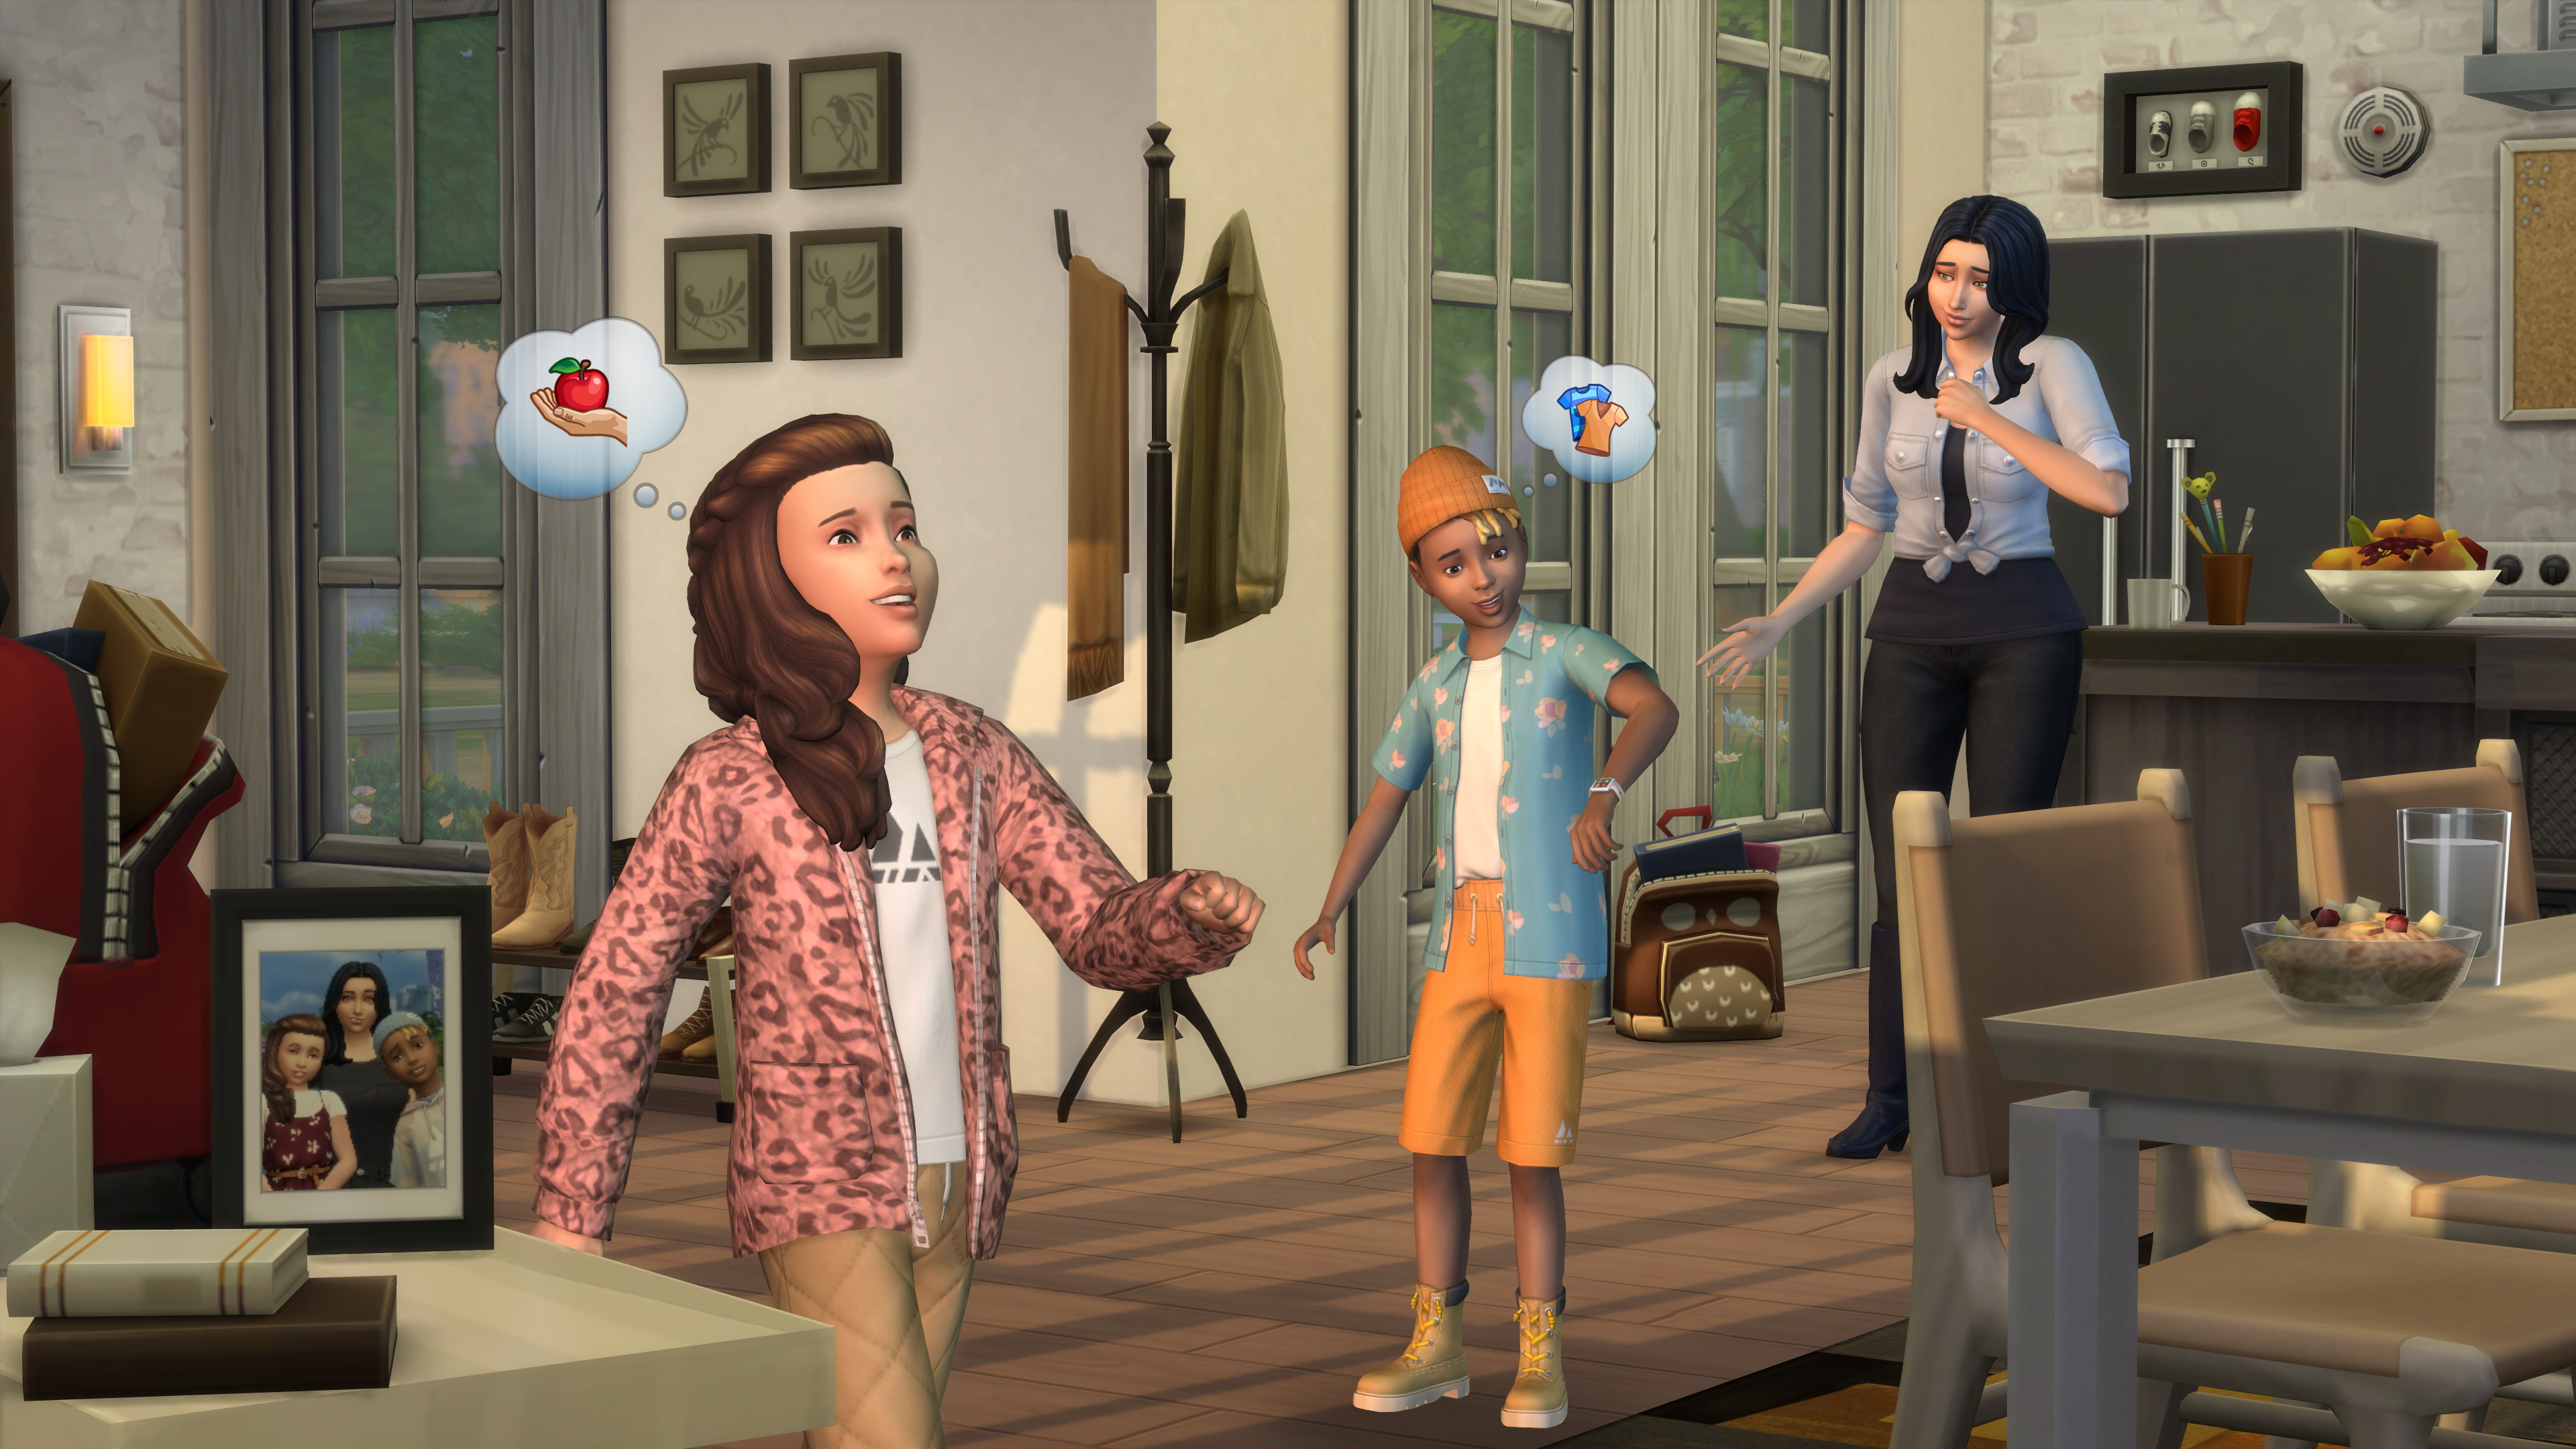 What to Expect From The Sims 5's Free-to-Play Elements